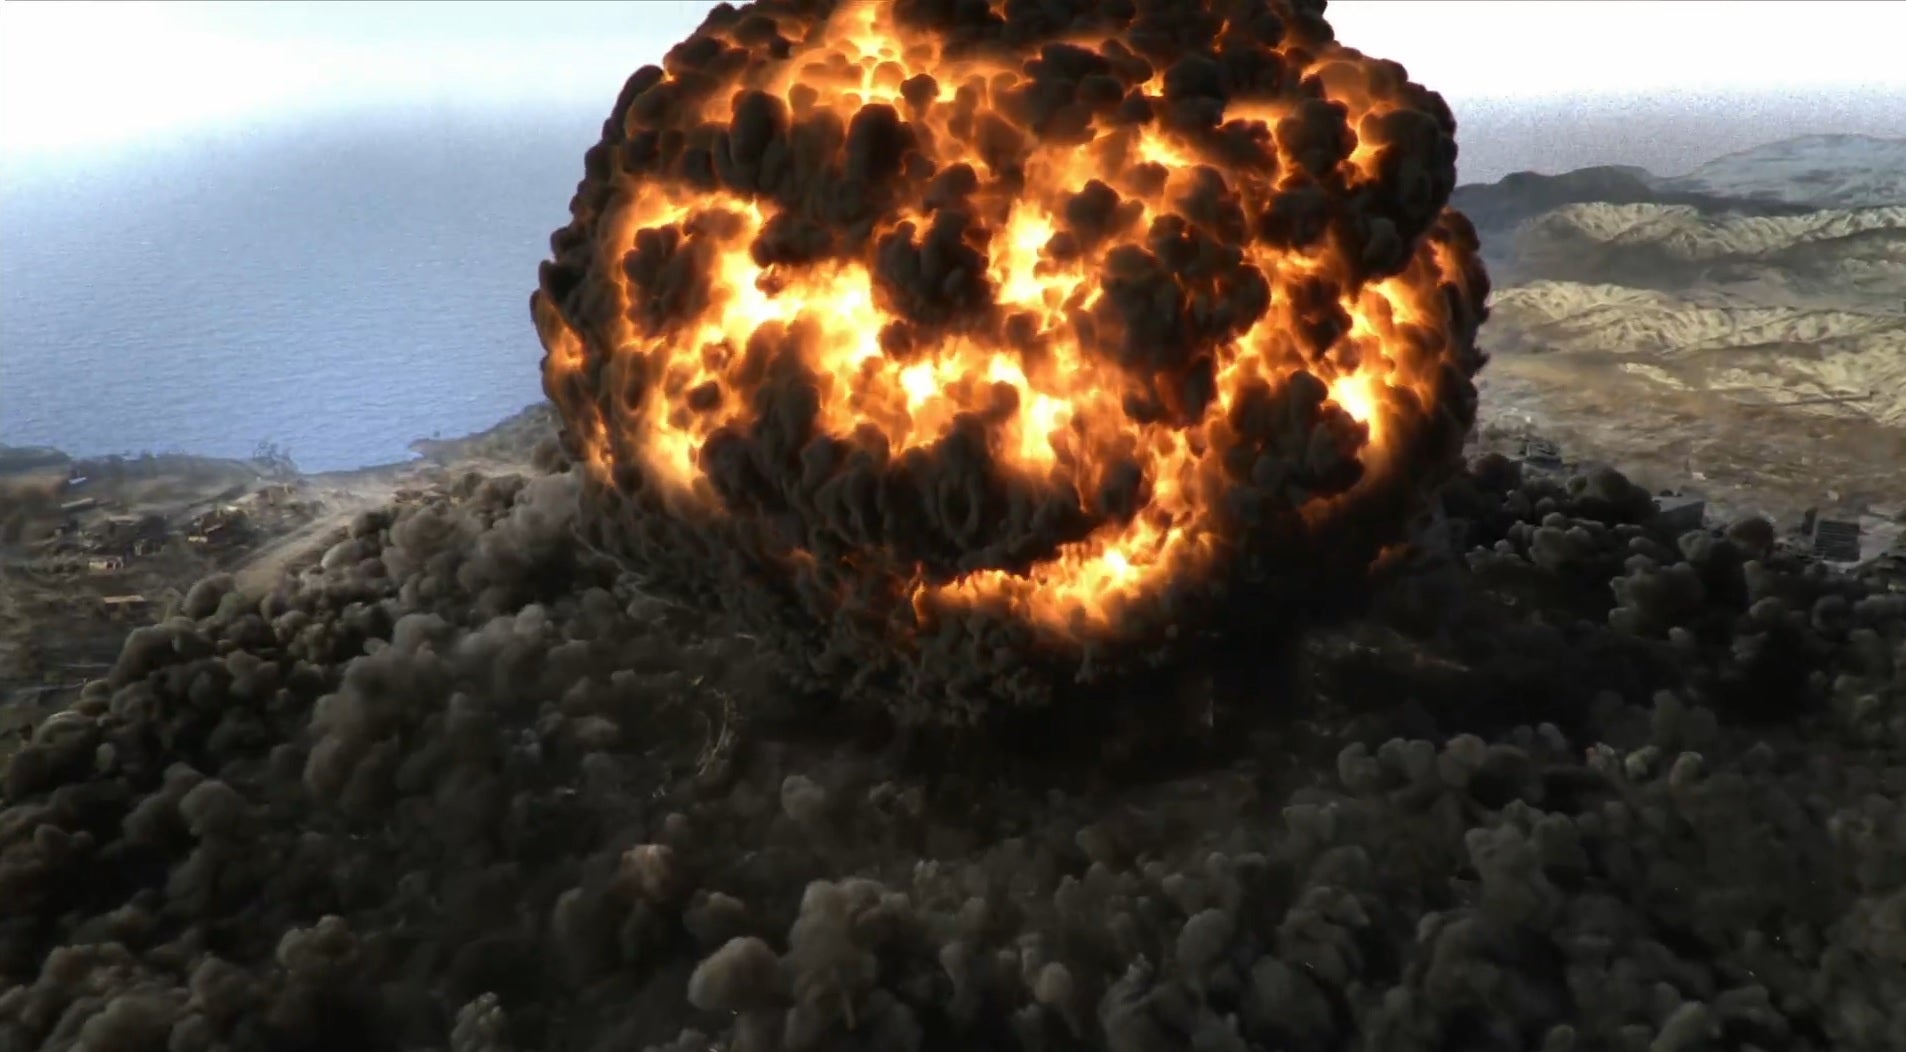 Call Of Duty: Warzone - A nuclear explosion covers the Verdansk map